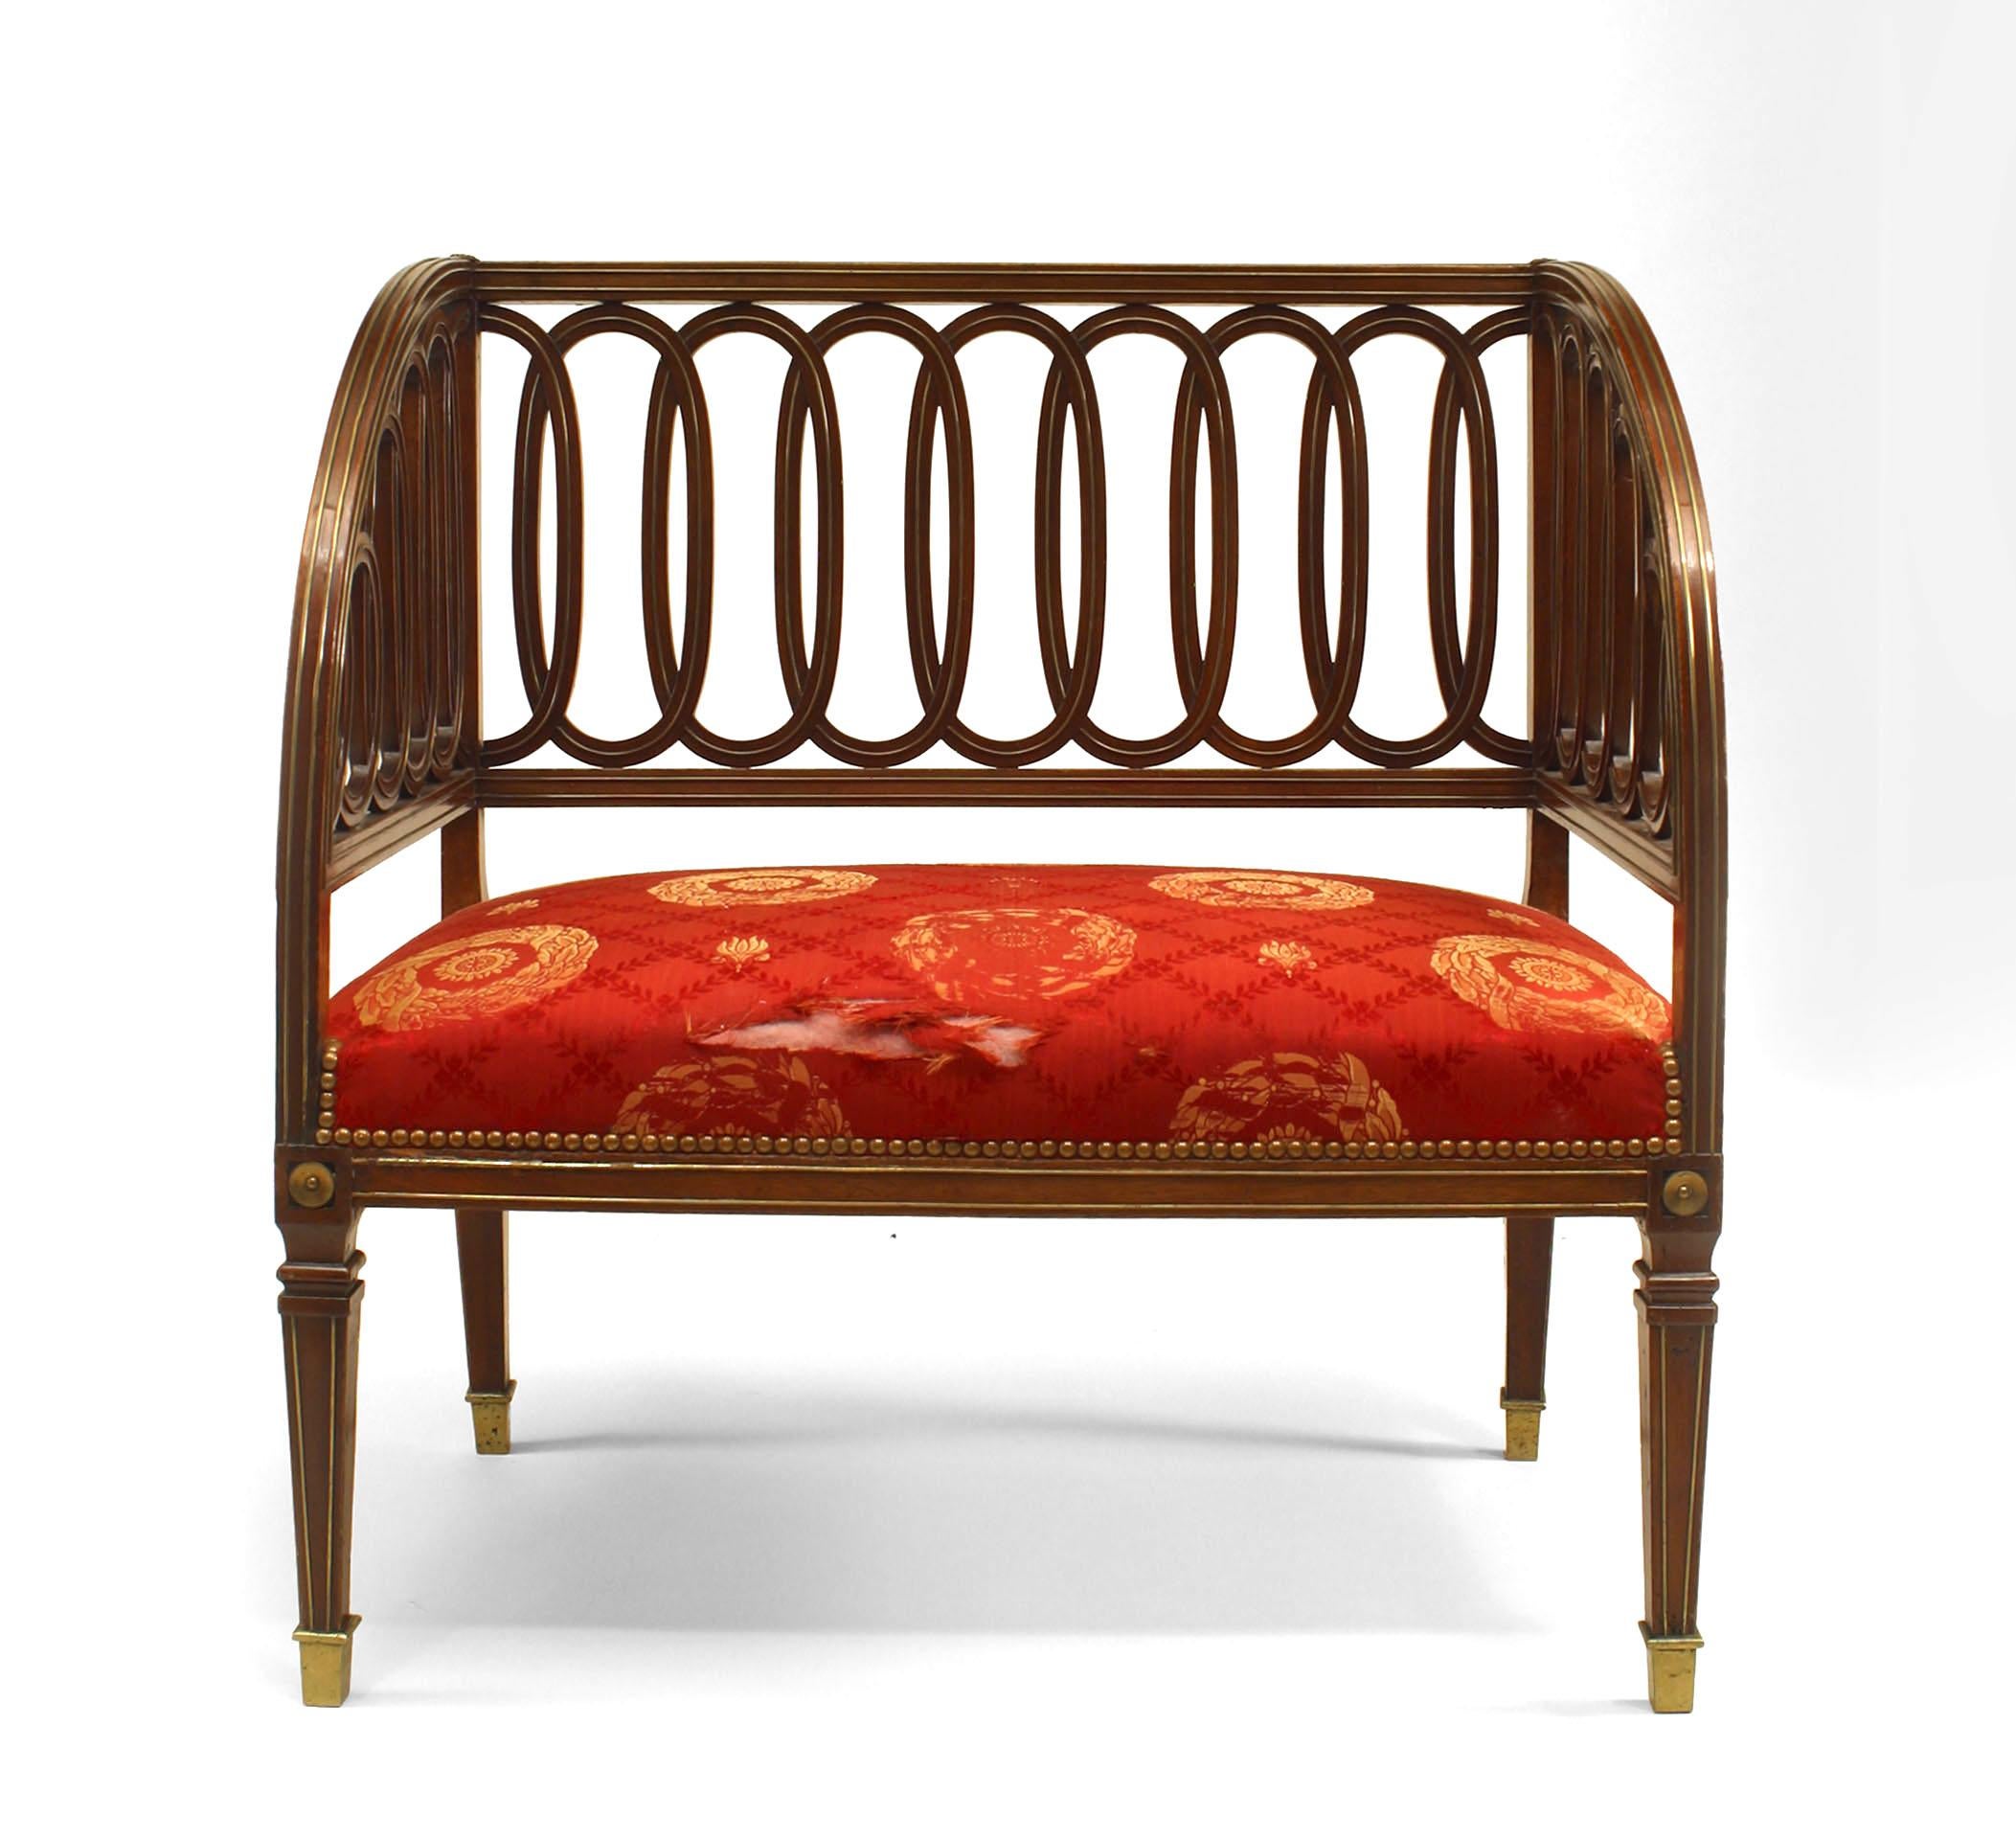 19th century Russian neoclassic small brass-mounted mahogany bench having an unusual interlocking pierced oval design to back and sides supported by tapered legs, the whole decorated with inset brass.